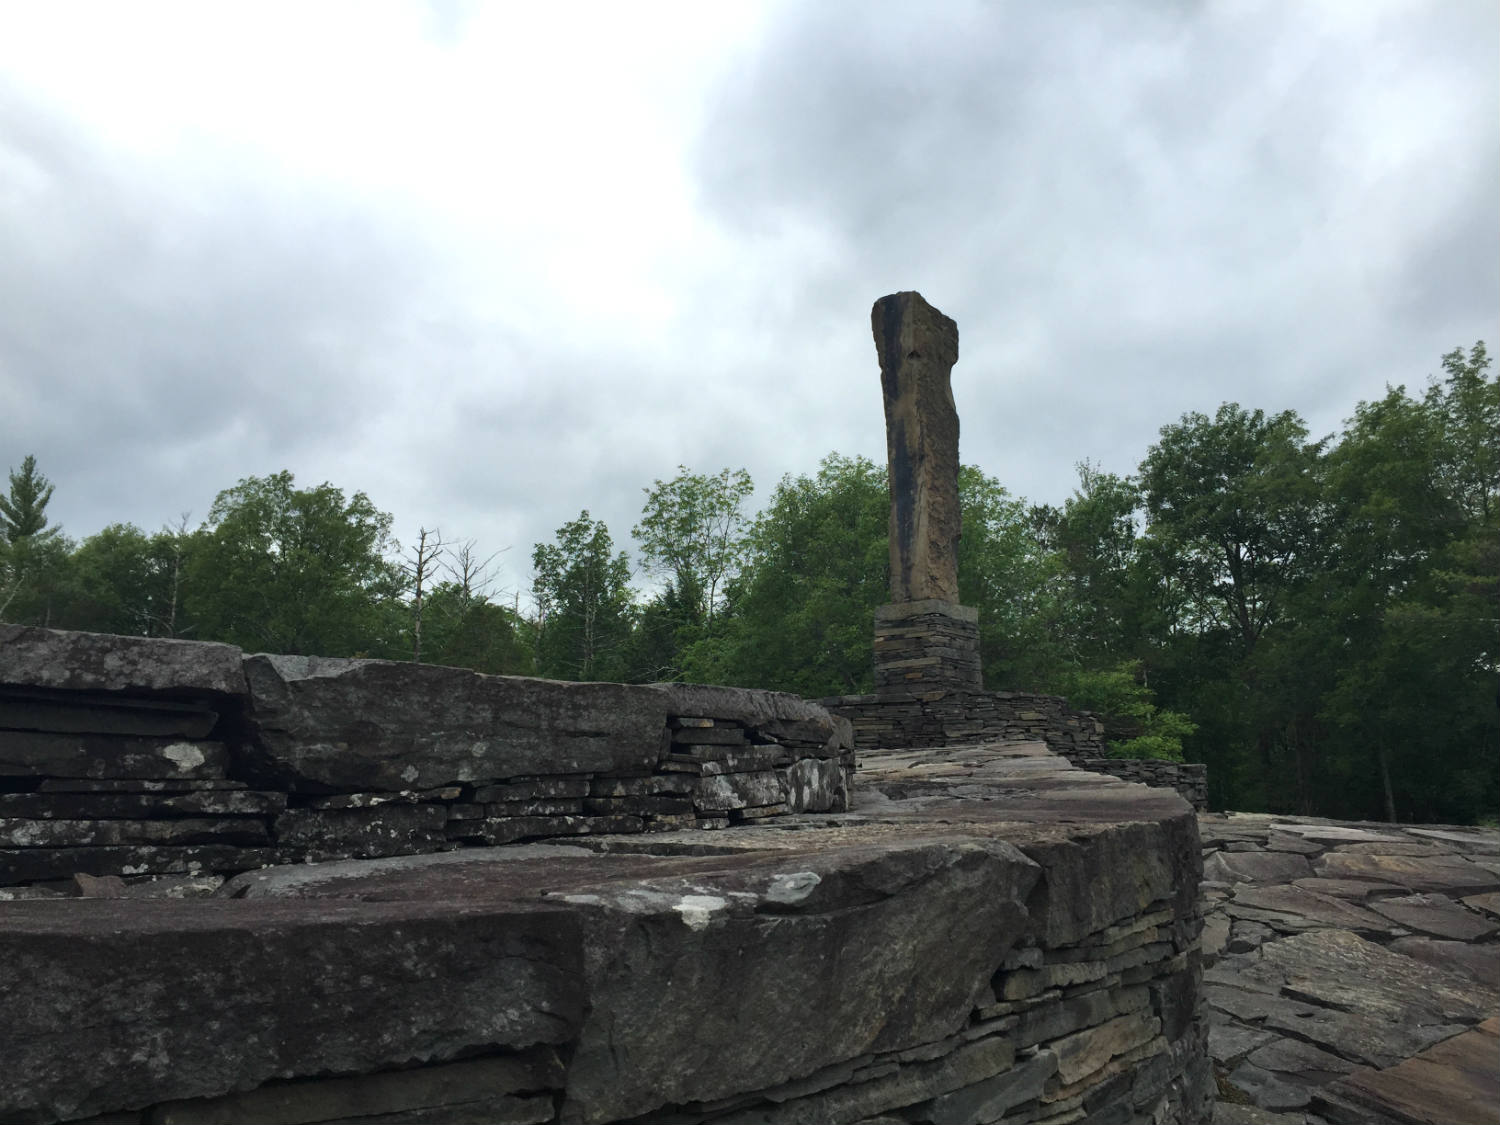 The Opus 40 'Flame' Sculpture